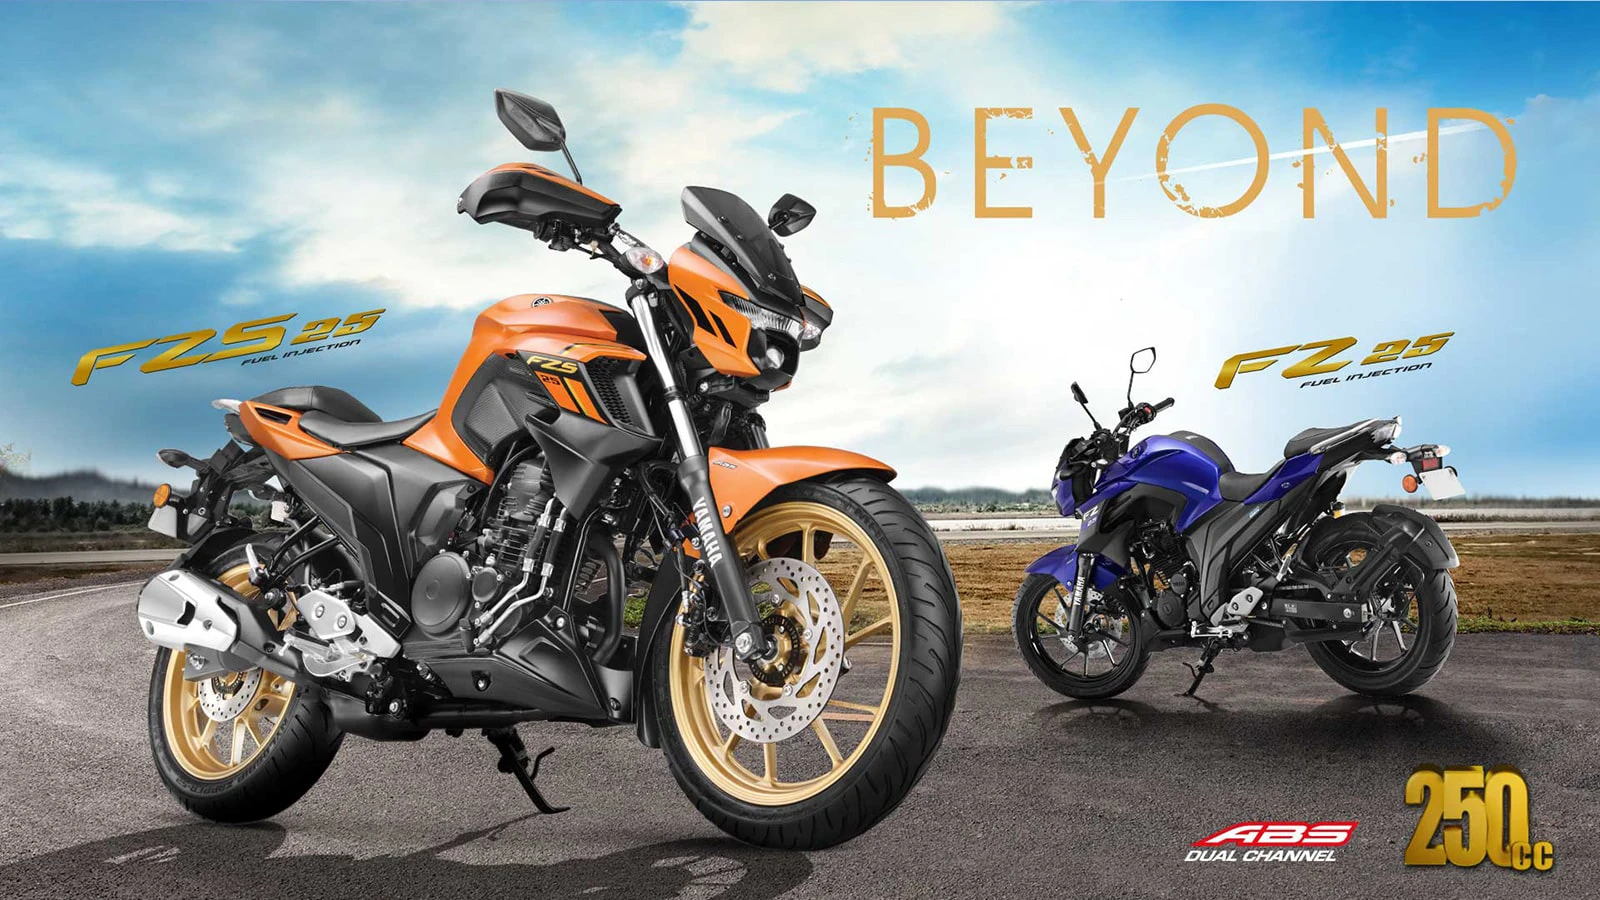 FZ 250 ❘ FZ25 Bs6 Bike, Price, Mileage, Images, Colours, Offers,  Specification | India Yamaha Motor